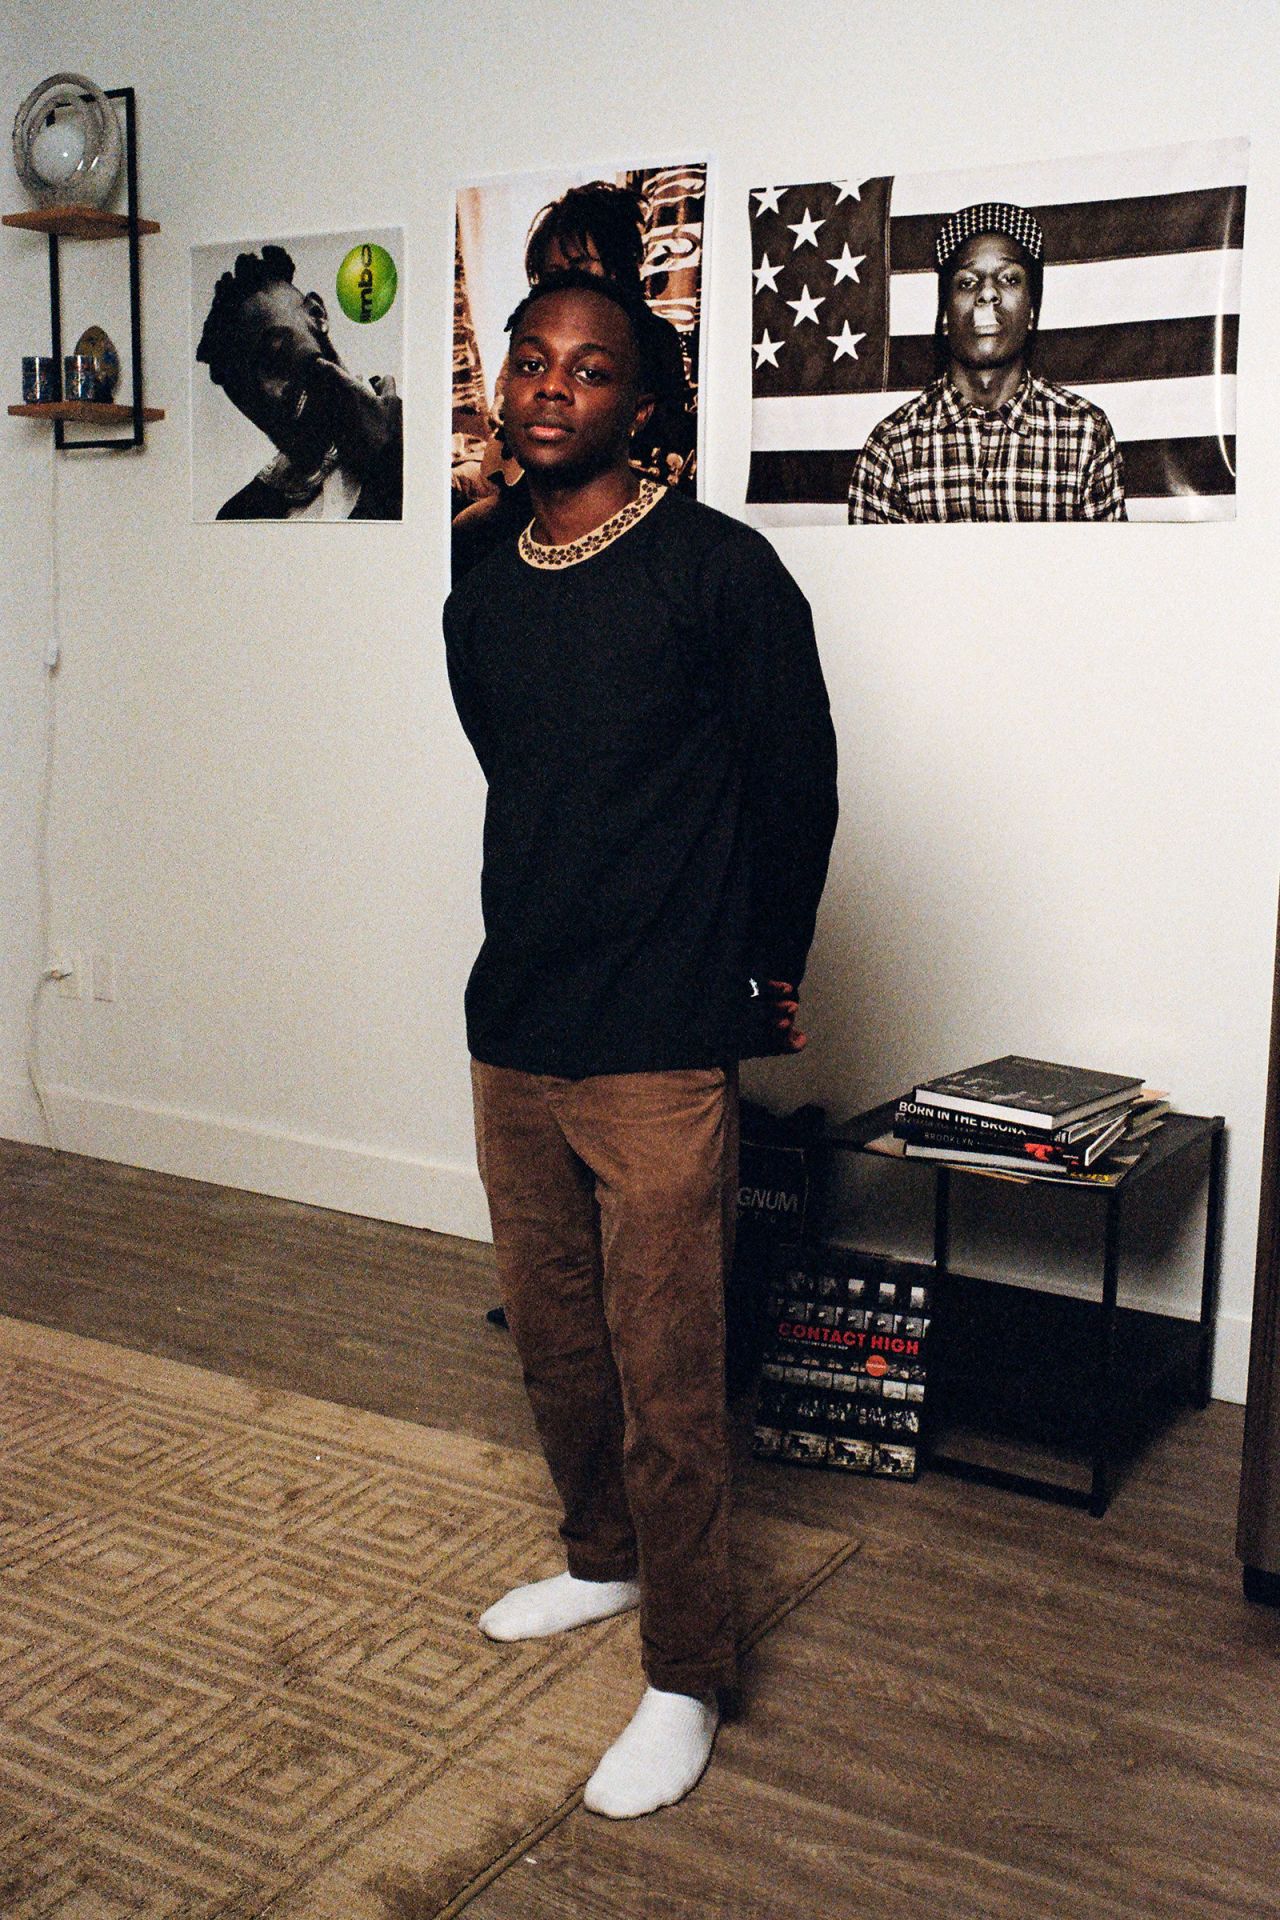 Akil, pictured in front of posters of American rappers A$AP Rocky and Aminé.